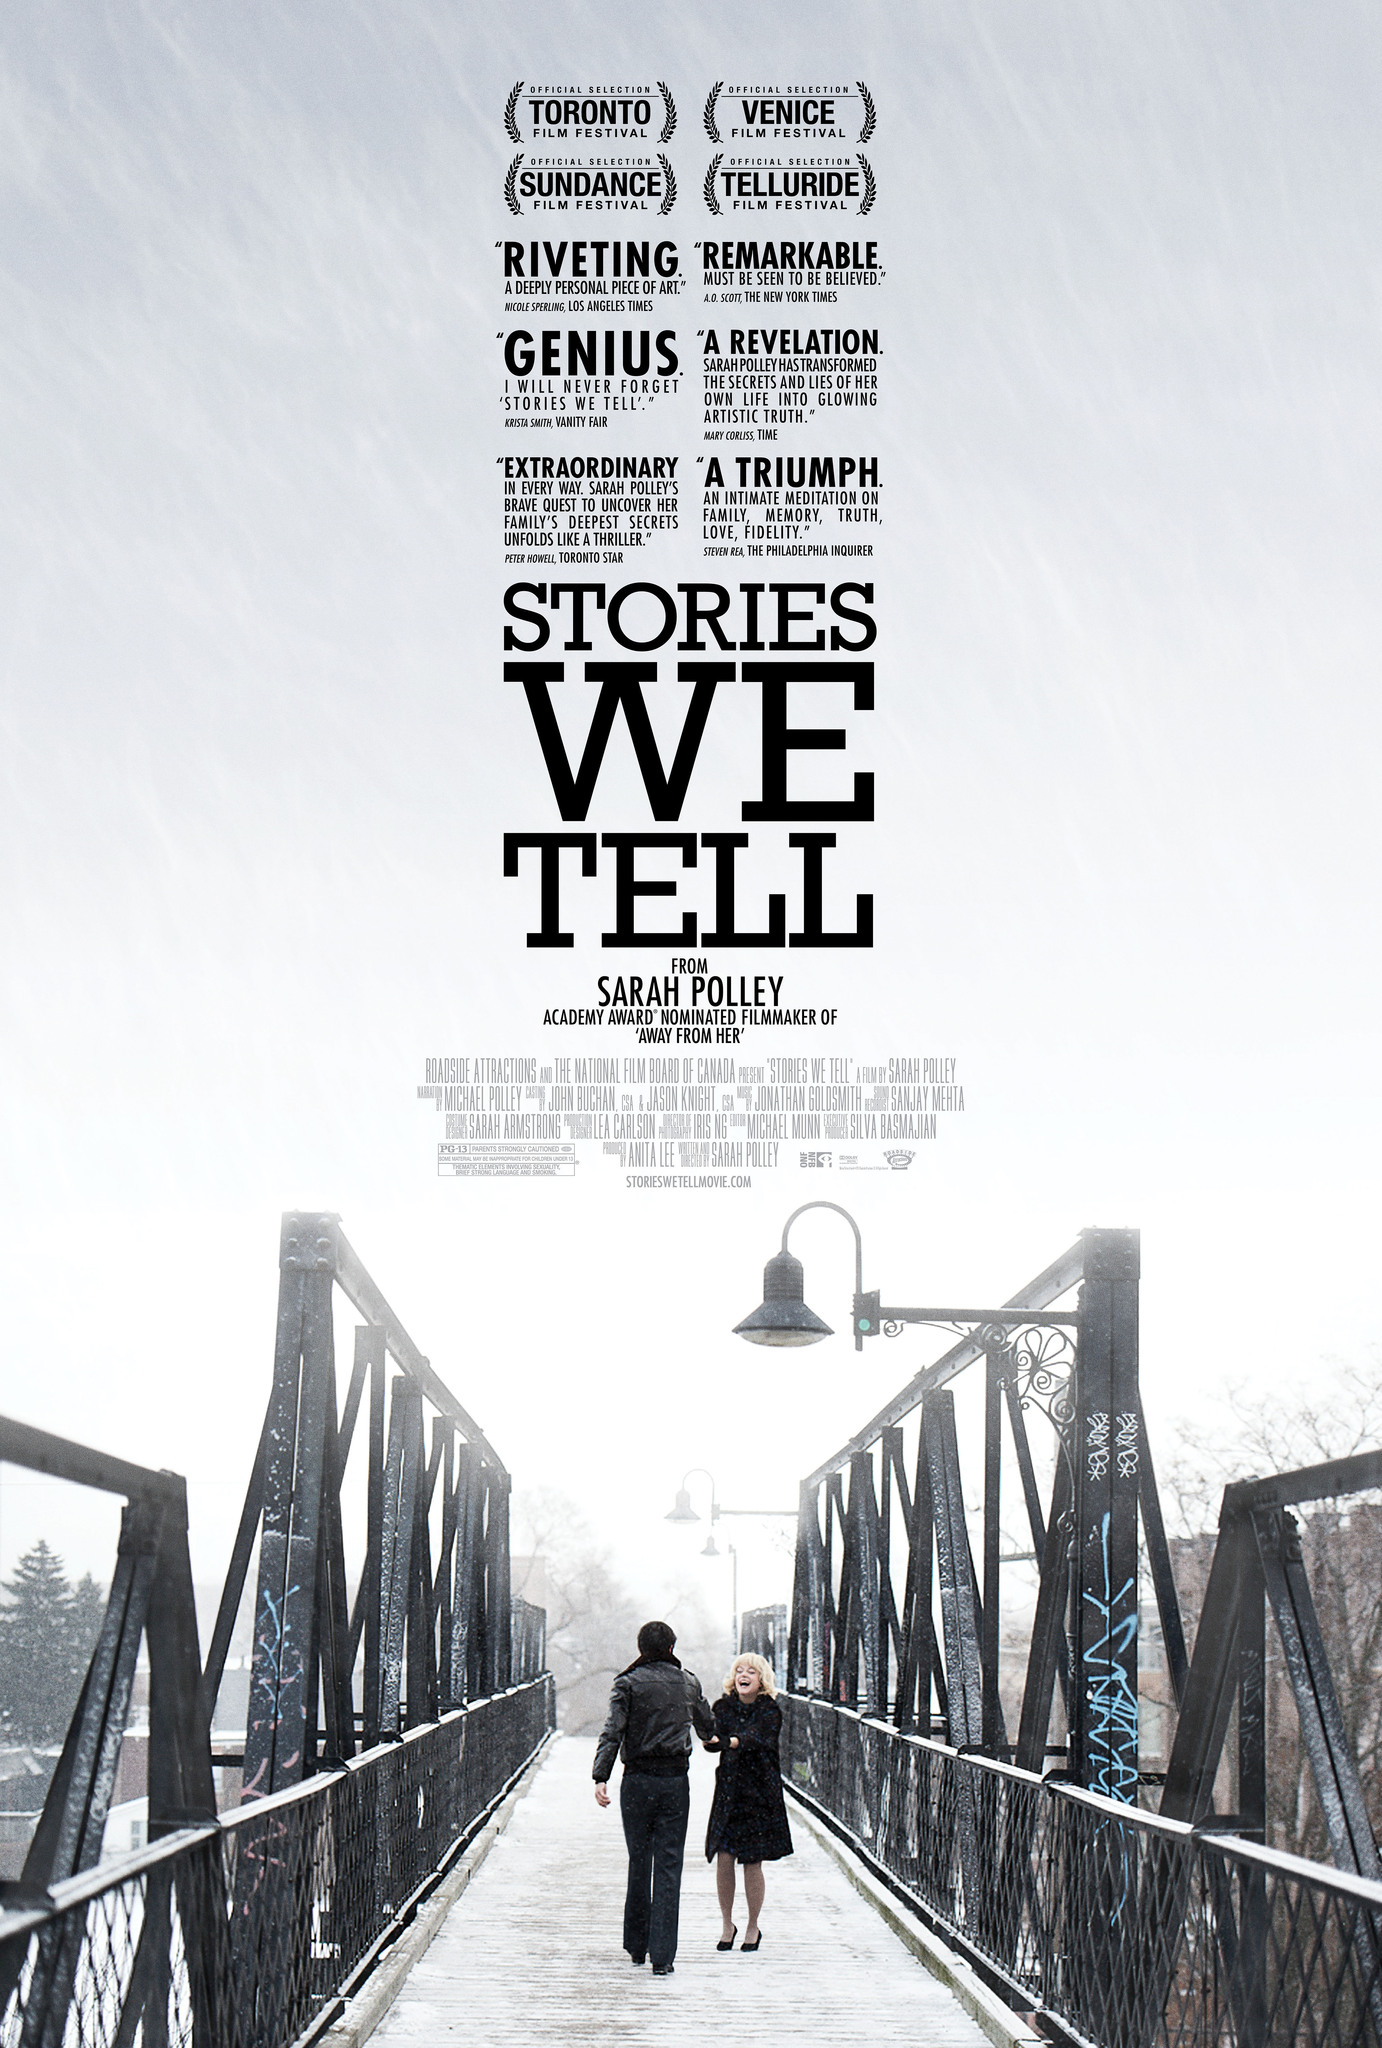 Stories We Tell (2013) Main Poster